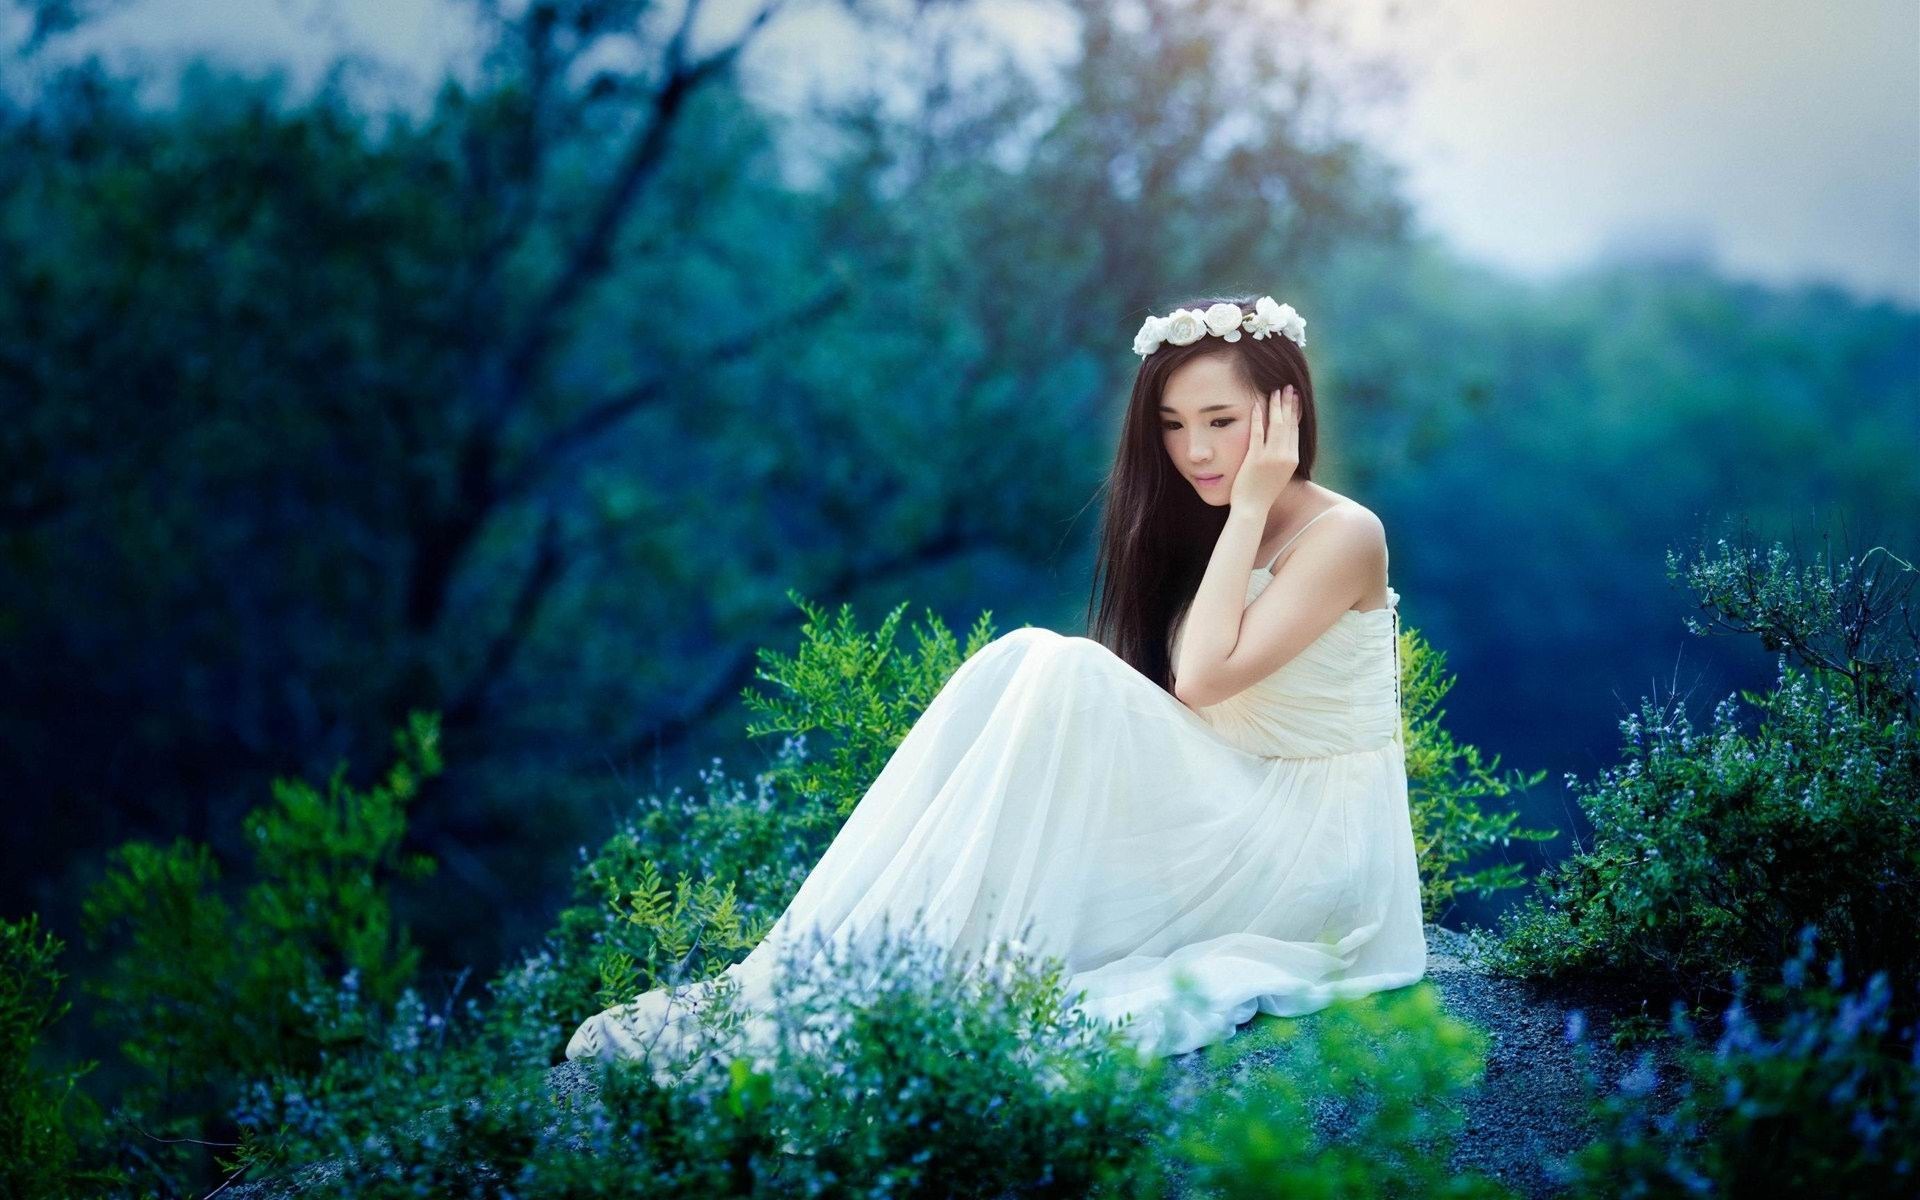 Pure and lovely Asian girls HD wallpapers #10 - 1920x1200